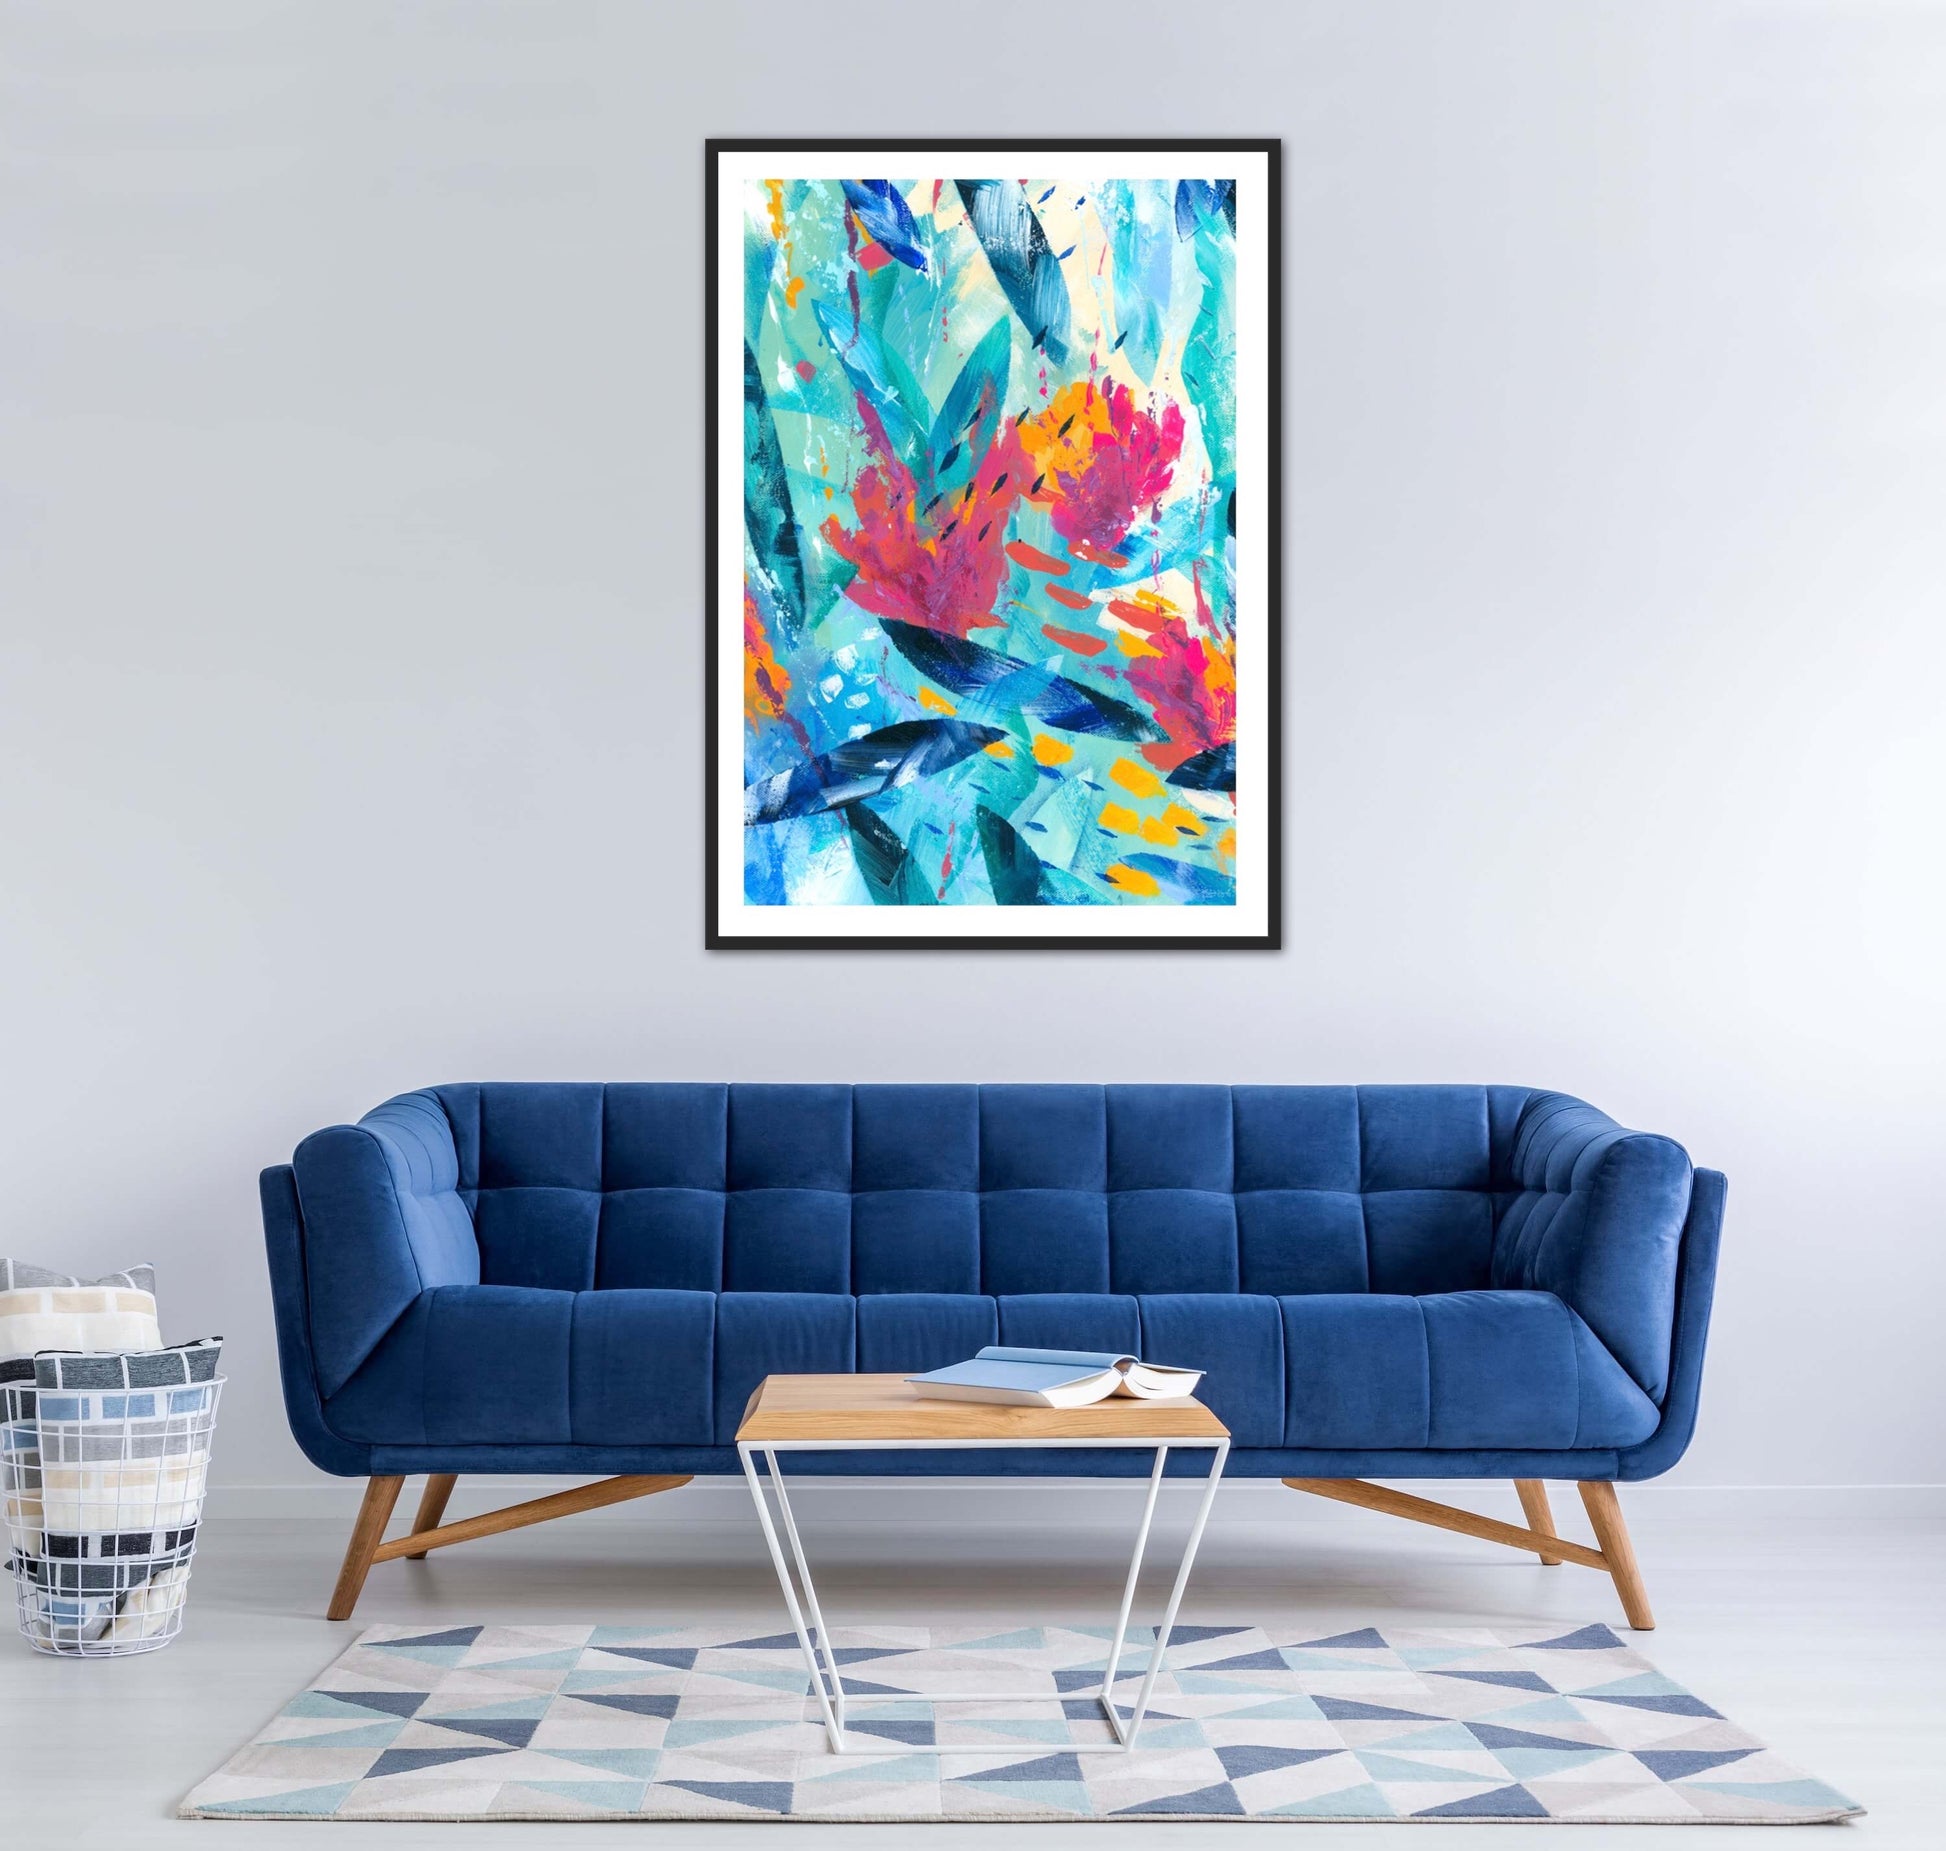 Tropical Seas colourful abstract art print displayed in a black frame on a wall in a contemporary interior decor above a blue velvet sofa.